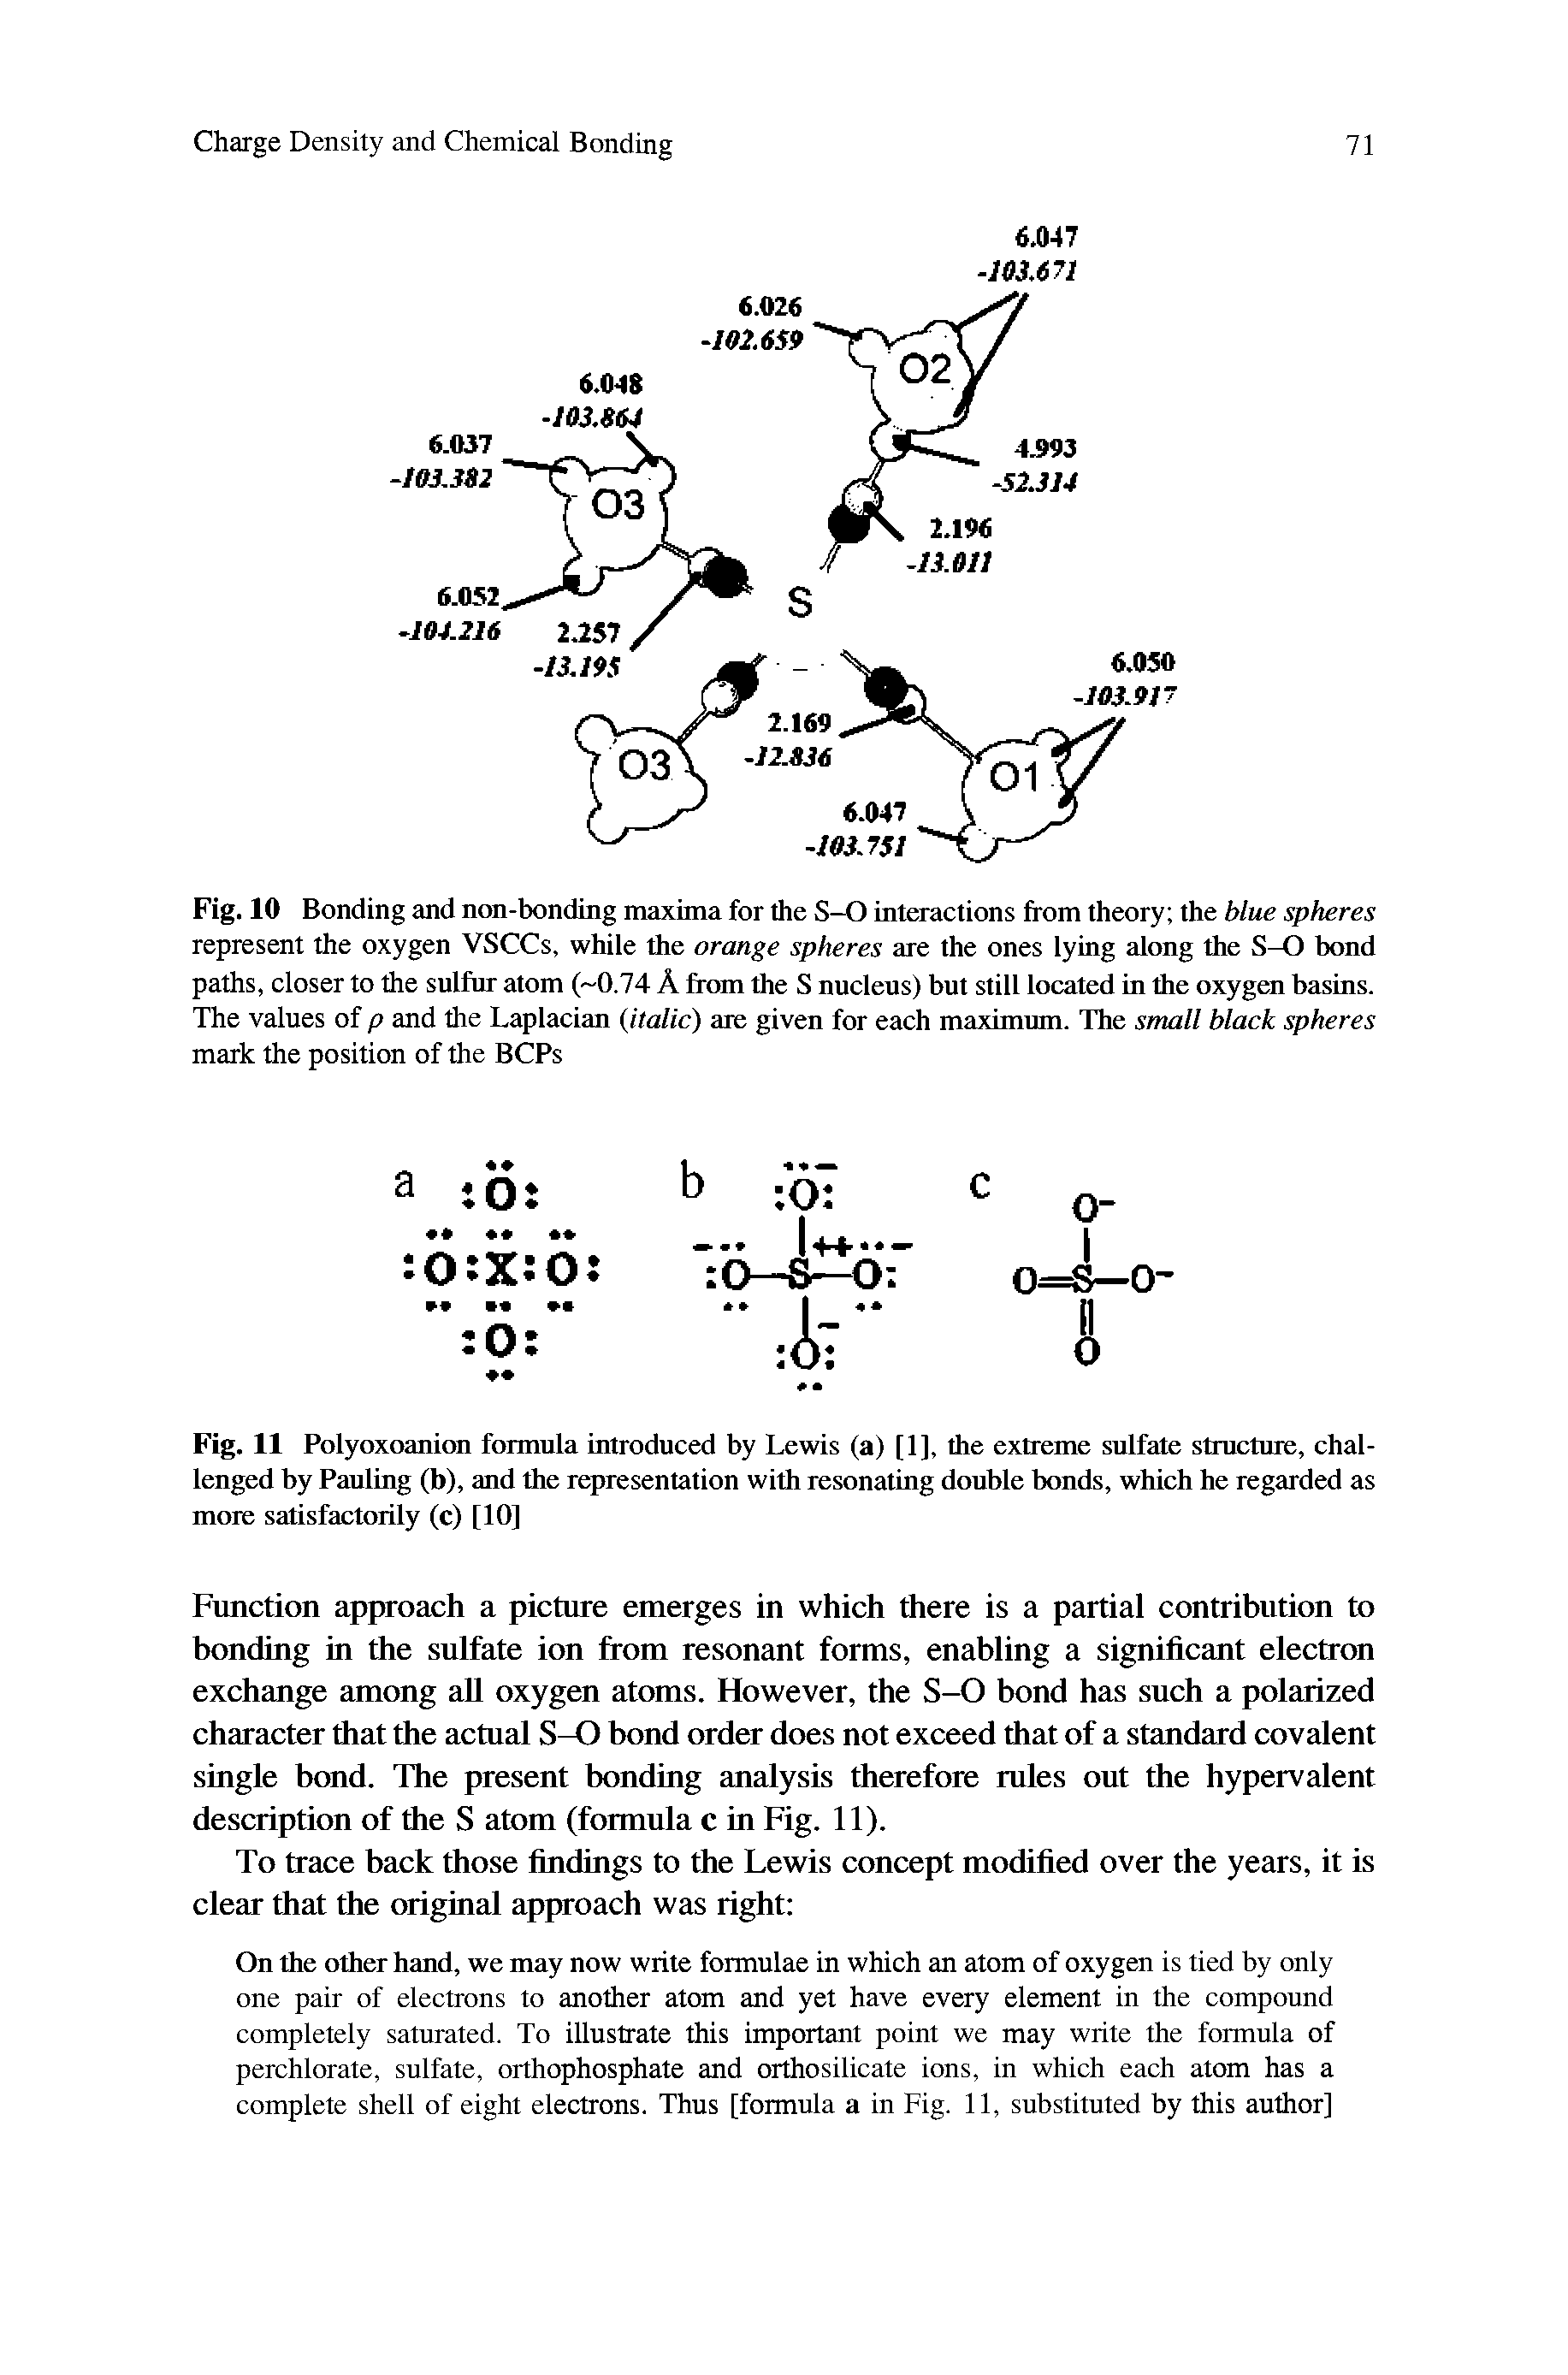 Fig. 11 Polyoxoanion formula introduced by Lewis (a) [1], the extreme sulfate structure, challenged by Pauling (b), and the representation with resonating double bonds, which he regarded as more satisfactorily (c) [10]...